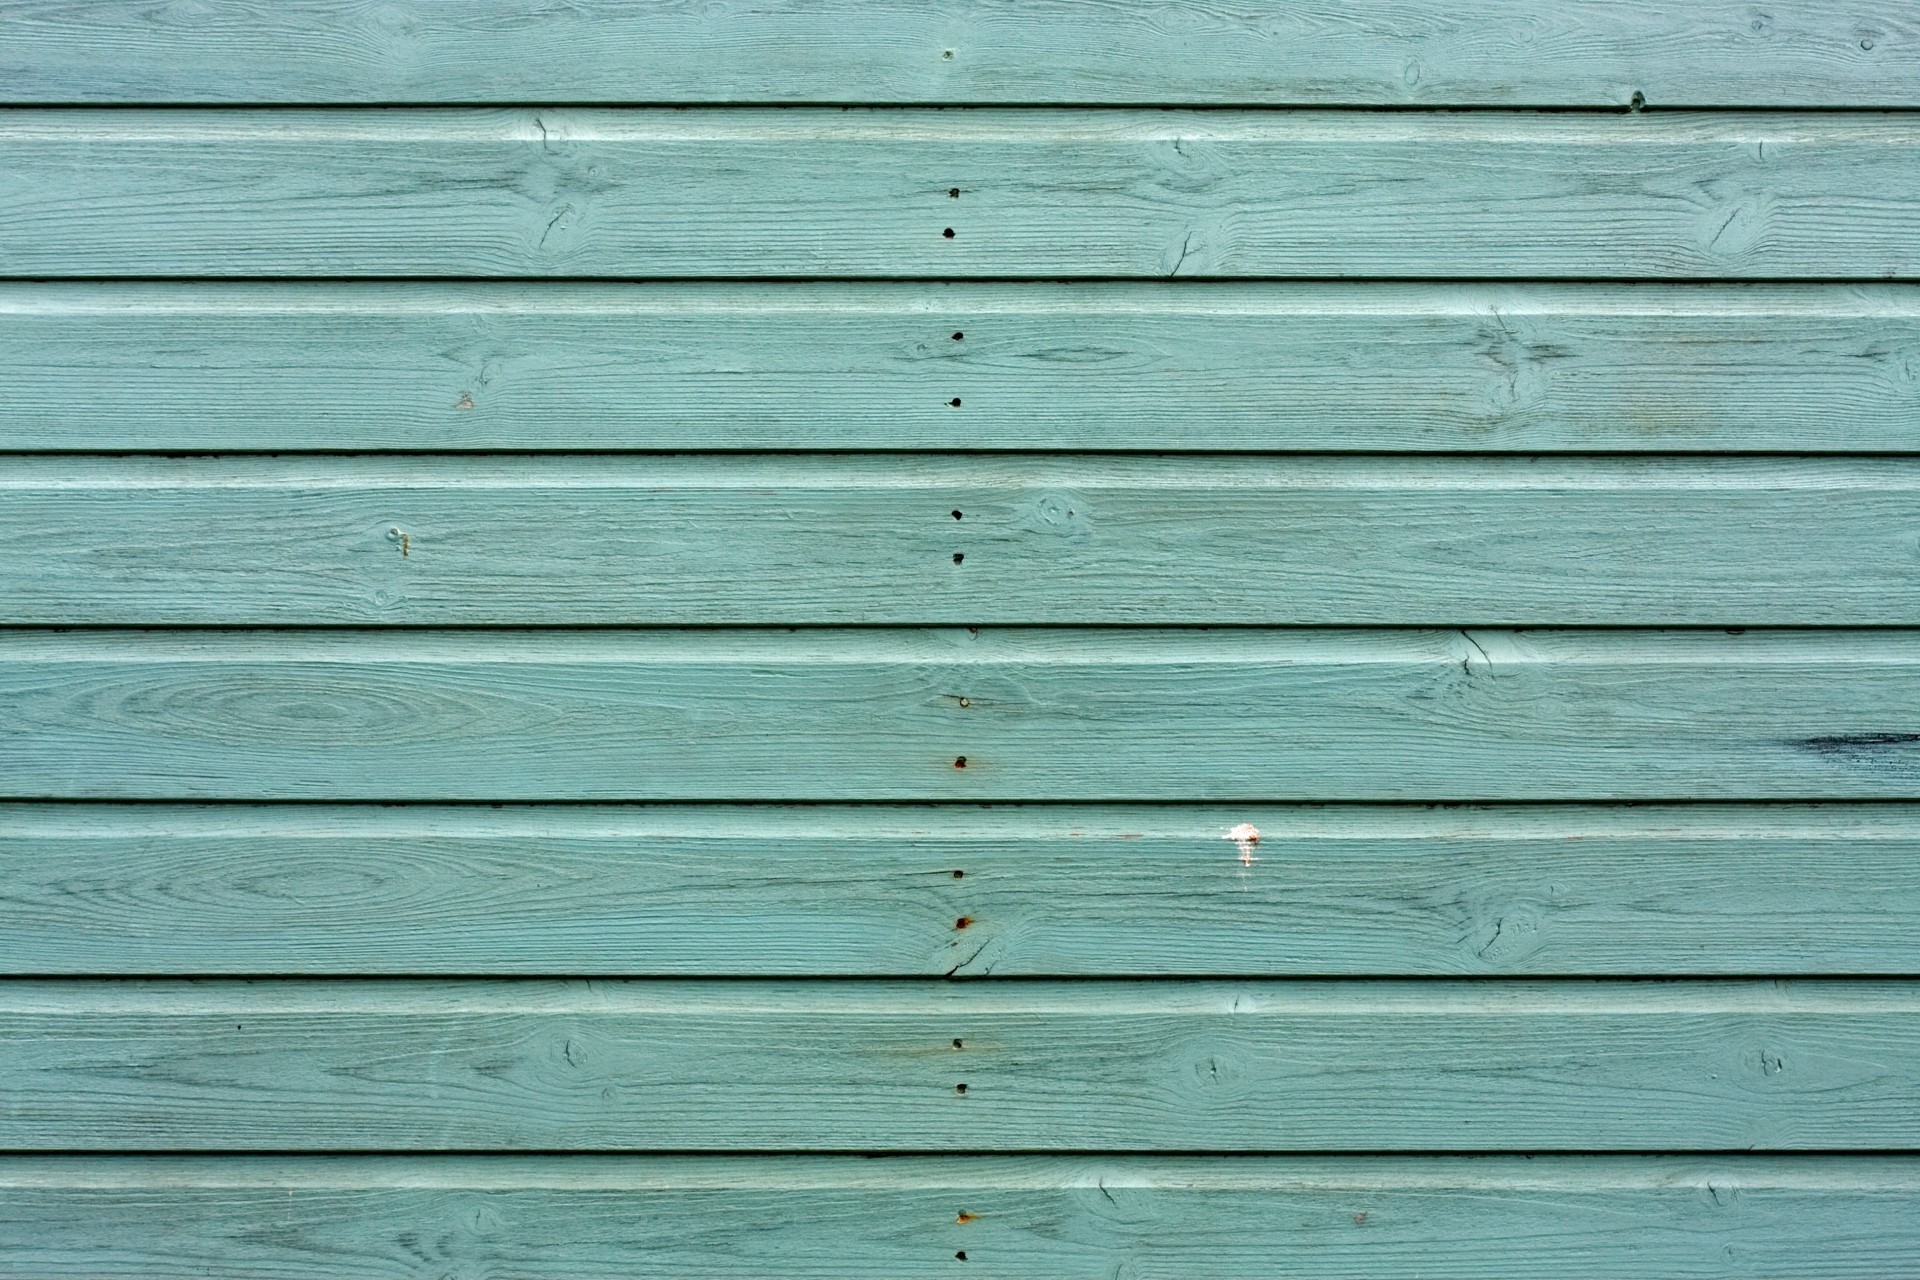 Wood grain texture plank floor old wall pattern line green blue material surface background hardwood planks